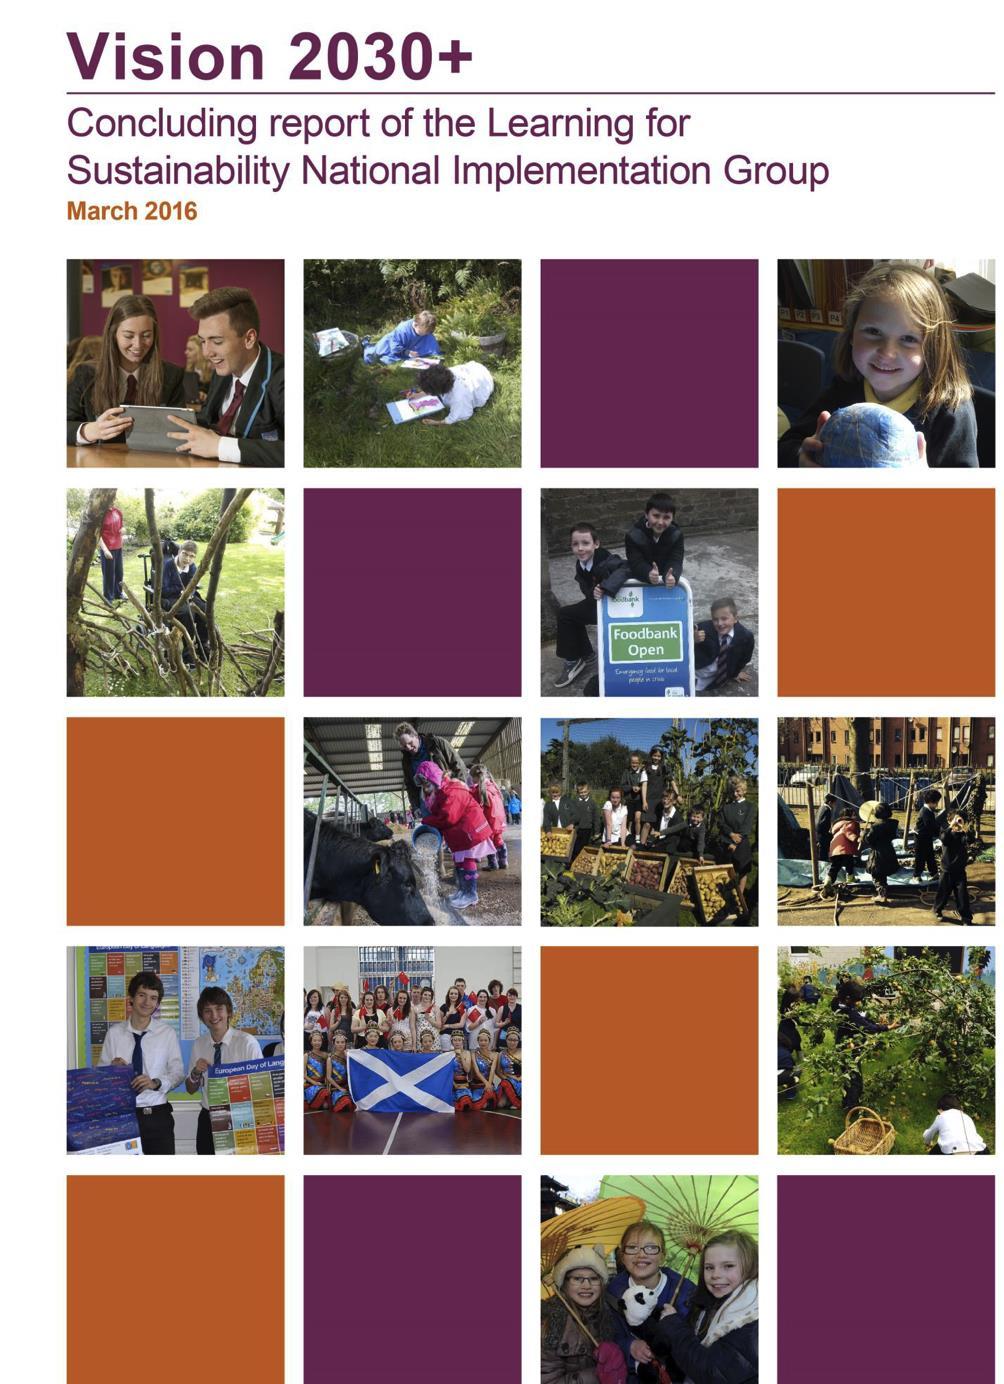 Accepted in full in March 2016 by three Scottish Ministers: Education, Sciences and Scotland s Languages Environment,